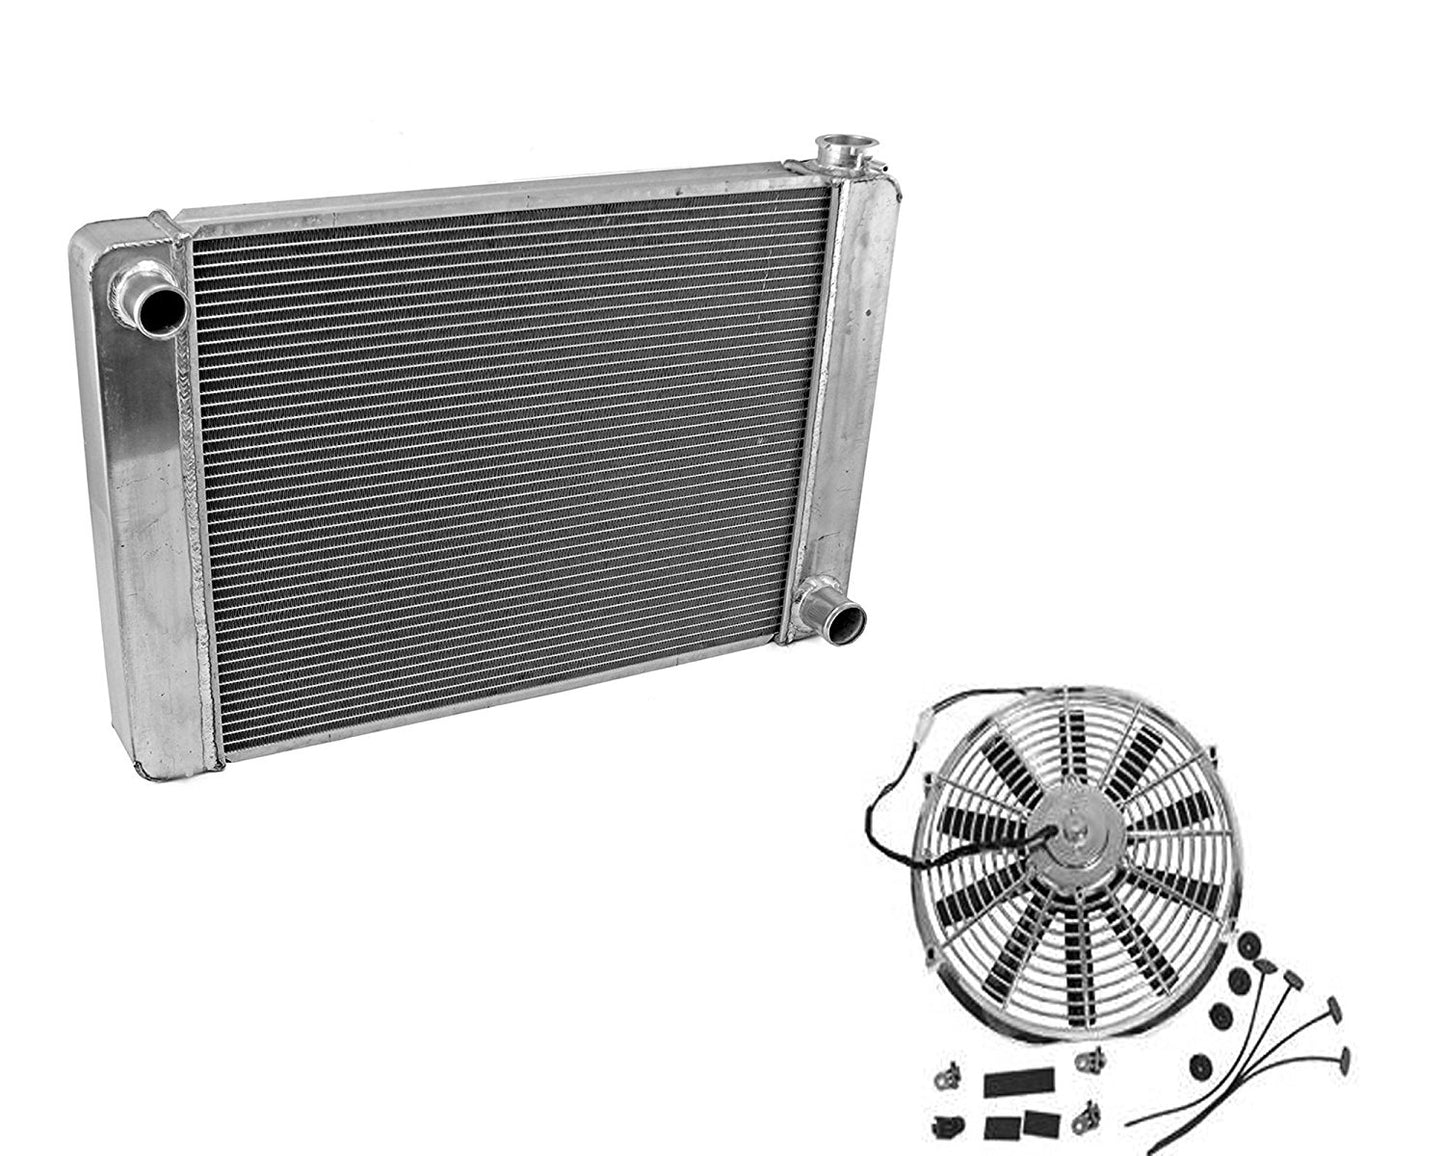 Fabricated Aluminum Radiator 24" x 19" x 3" Overall For SBC BBC Chevy GM&Electric 12" Chrome Straight Blade Cooling Fan